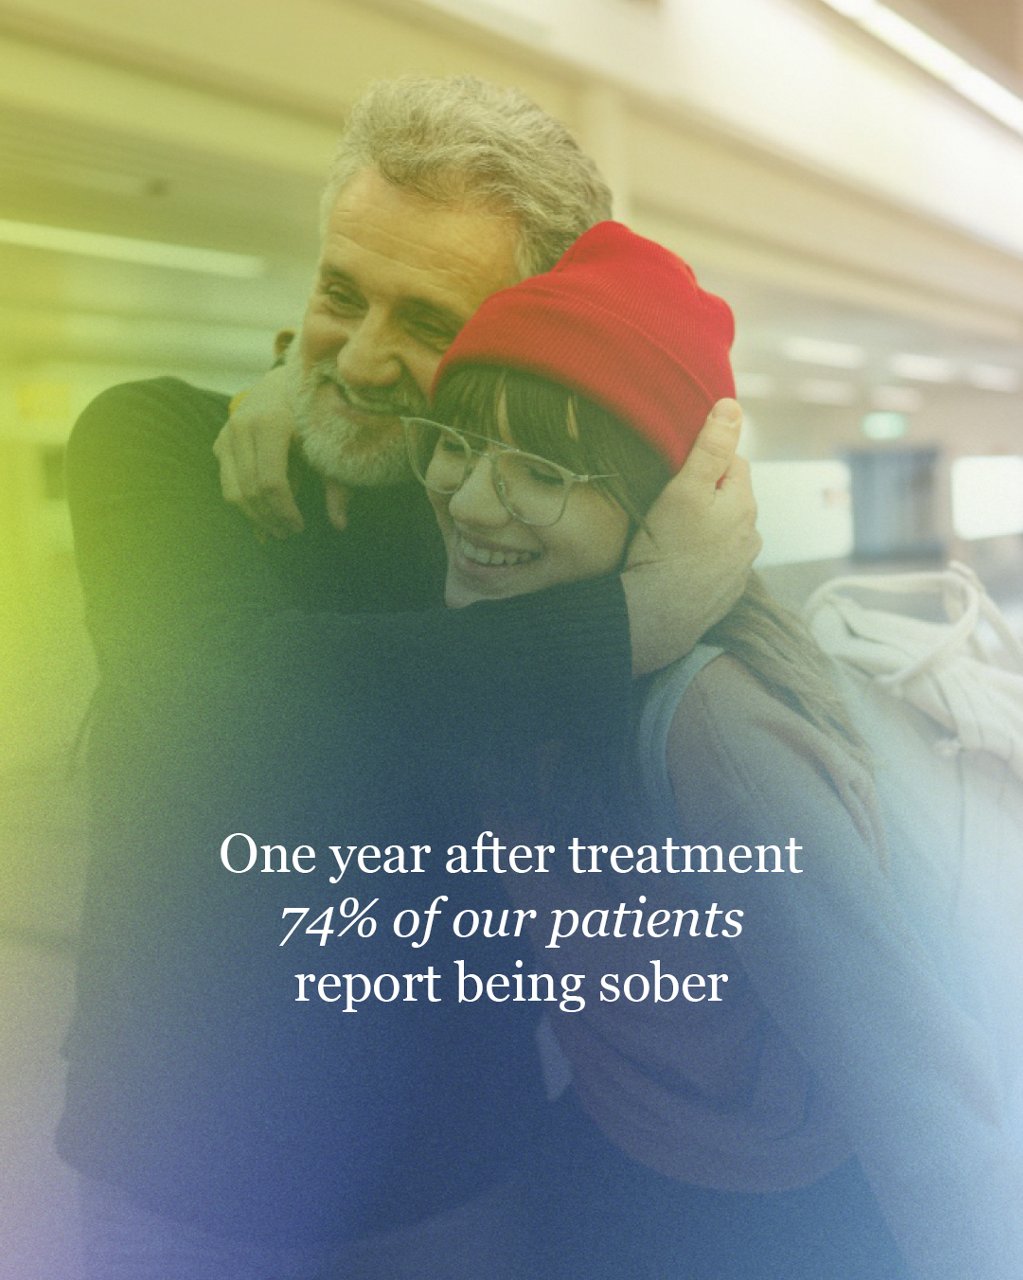 One year after treatment, 74 percent of our patients report being sober